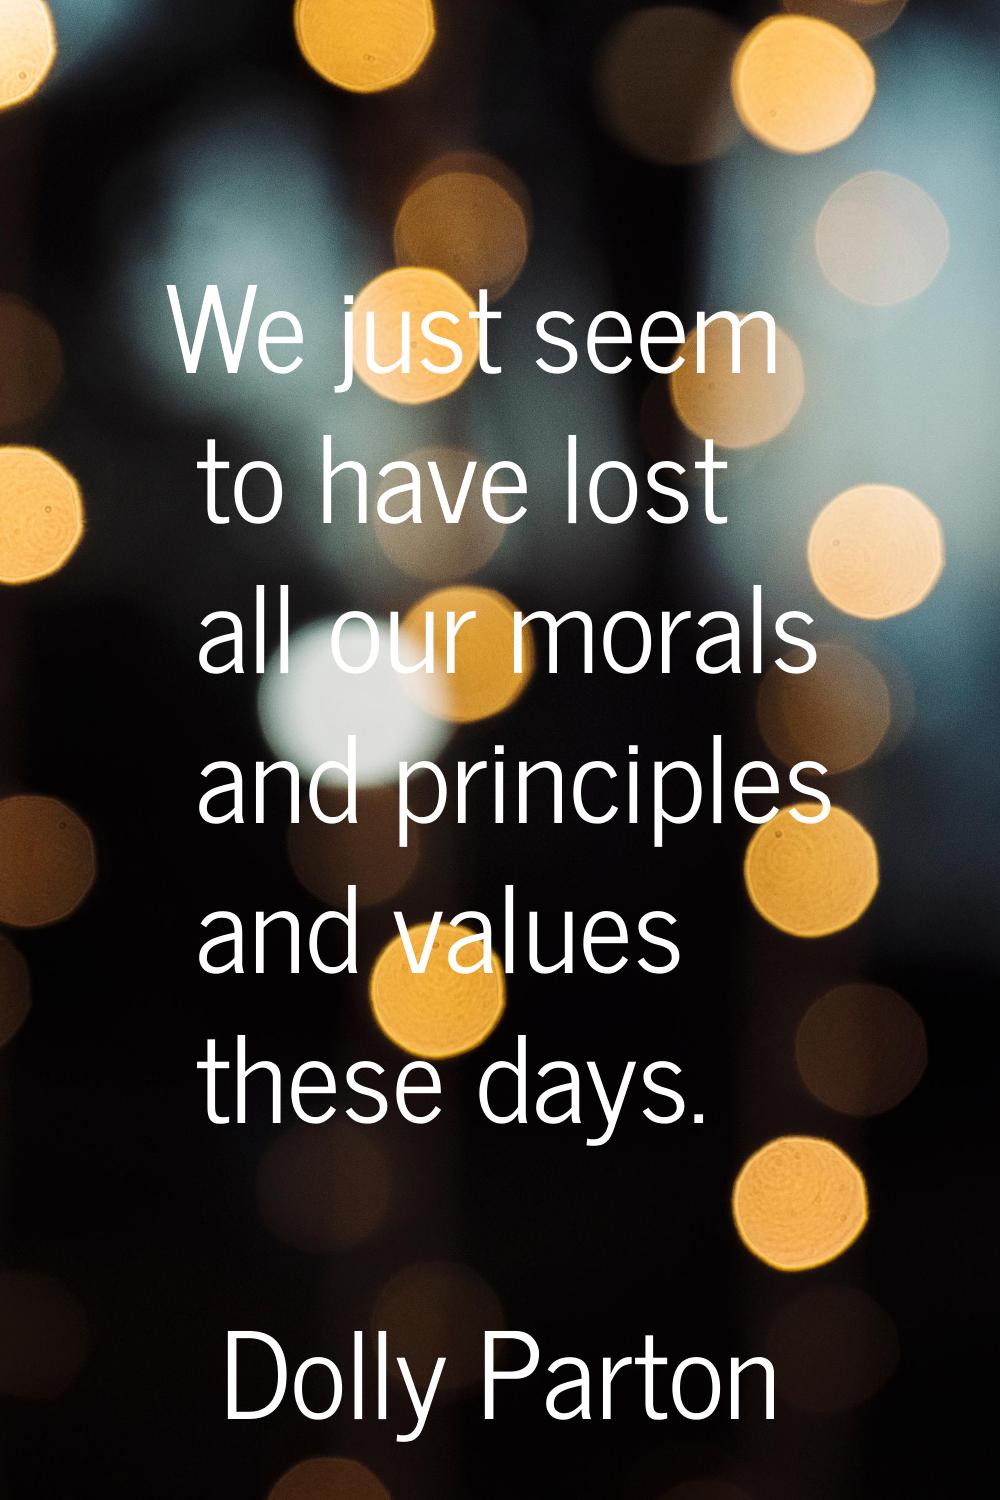 We just seem to have lost all our morals and principles and values these days.